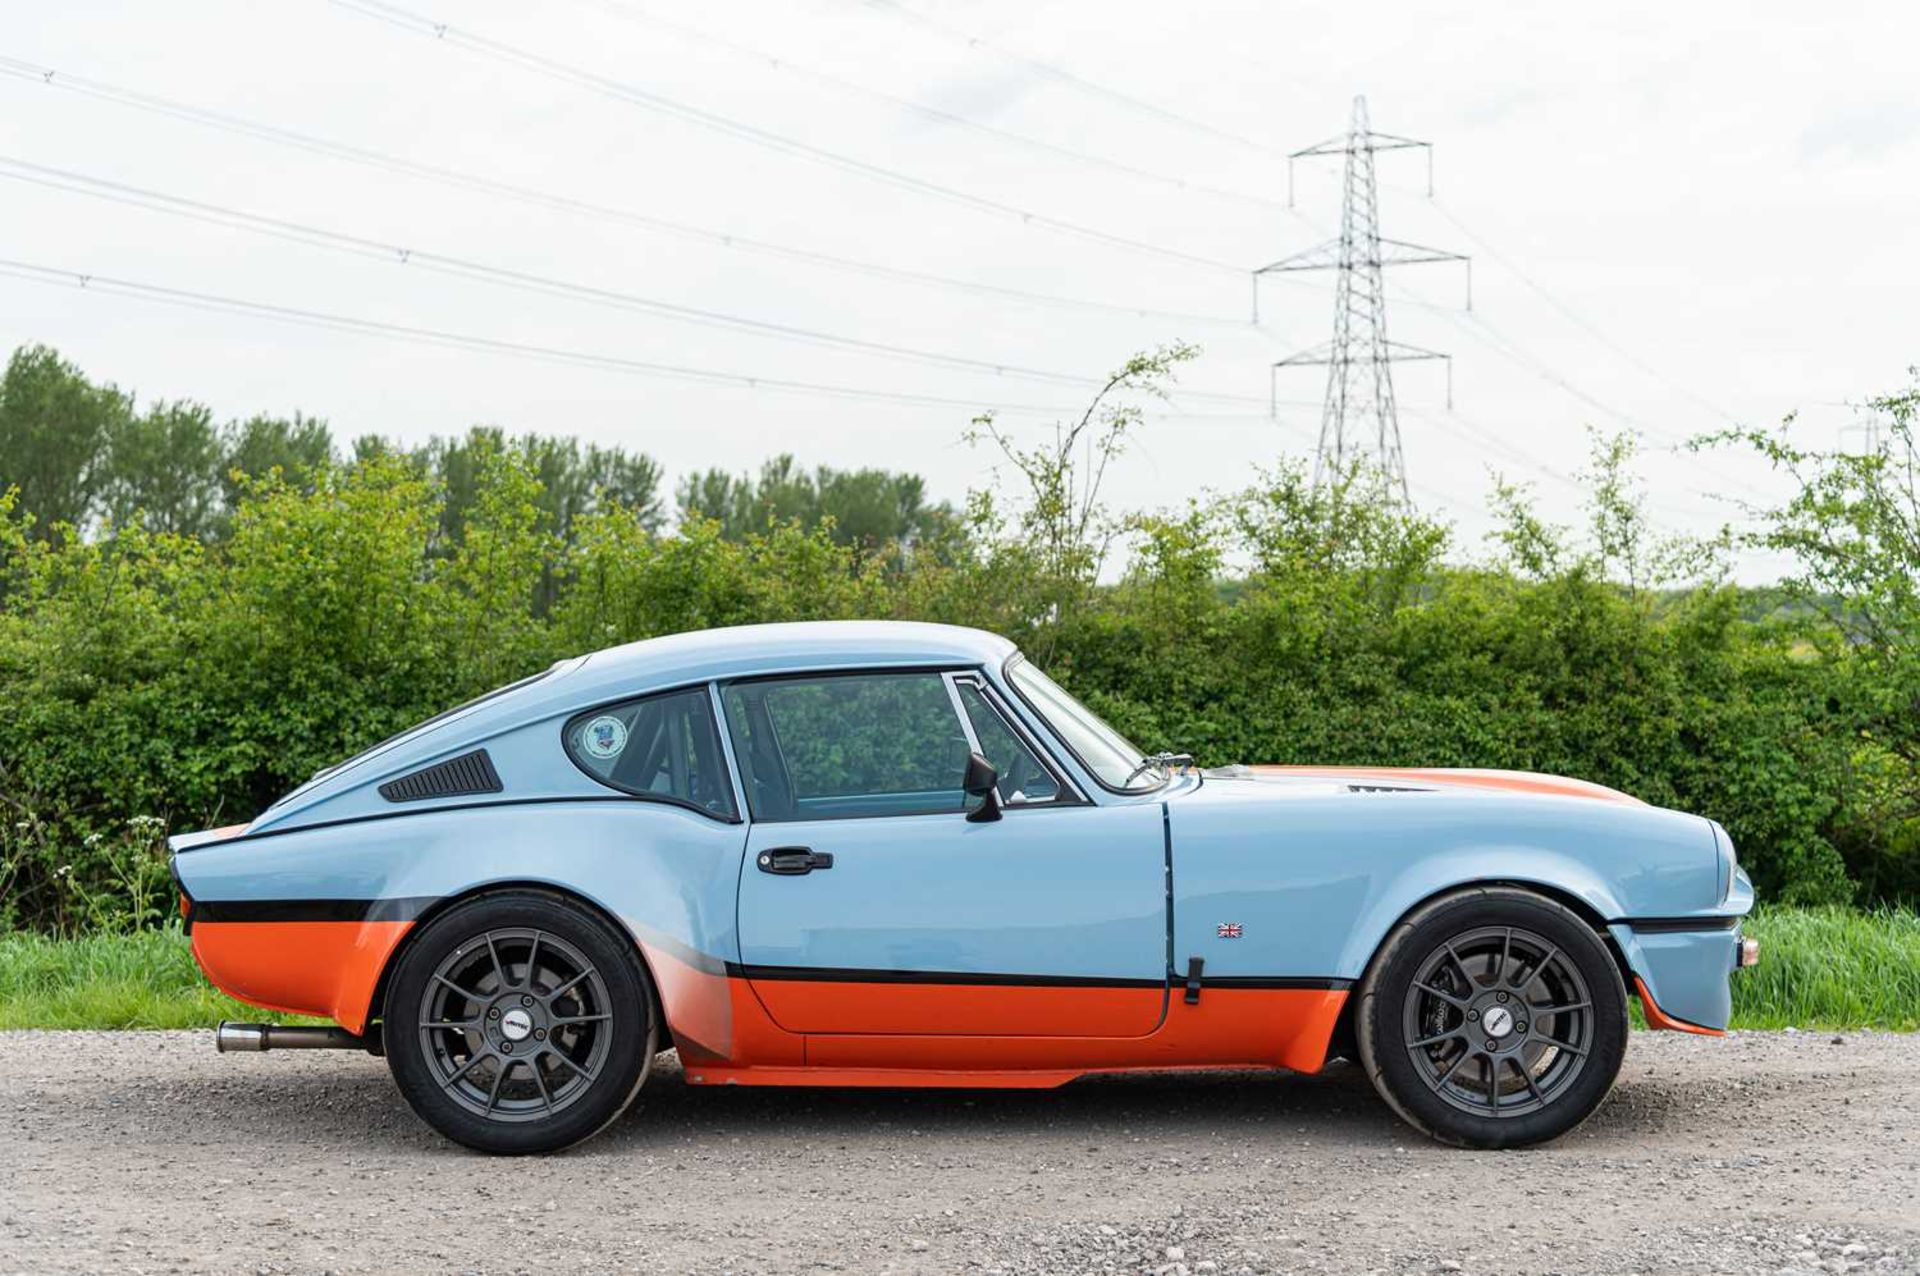 1973 Triumph GT6  ***NO RESERVE*** Presented in Gulf Racing-inspired paintwork, road-going track wea - Image 9 of 65